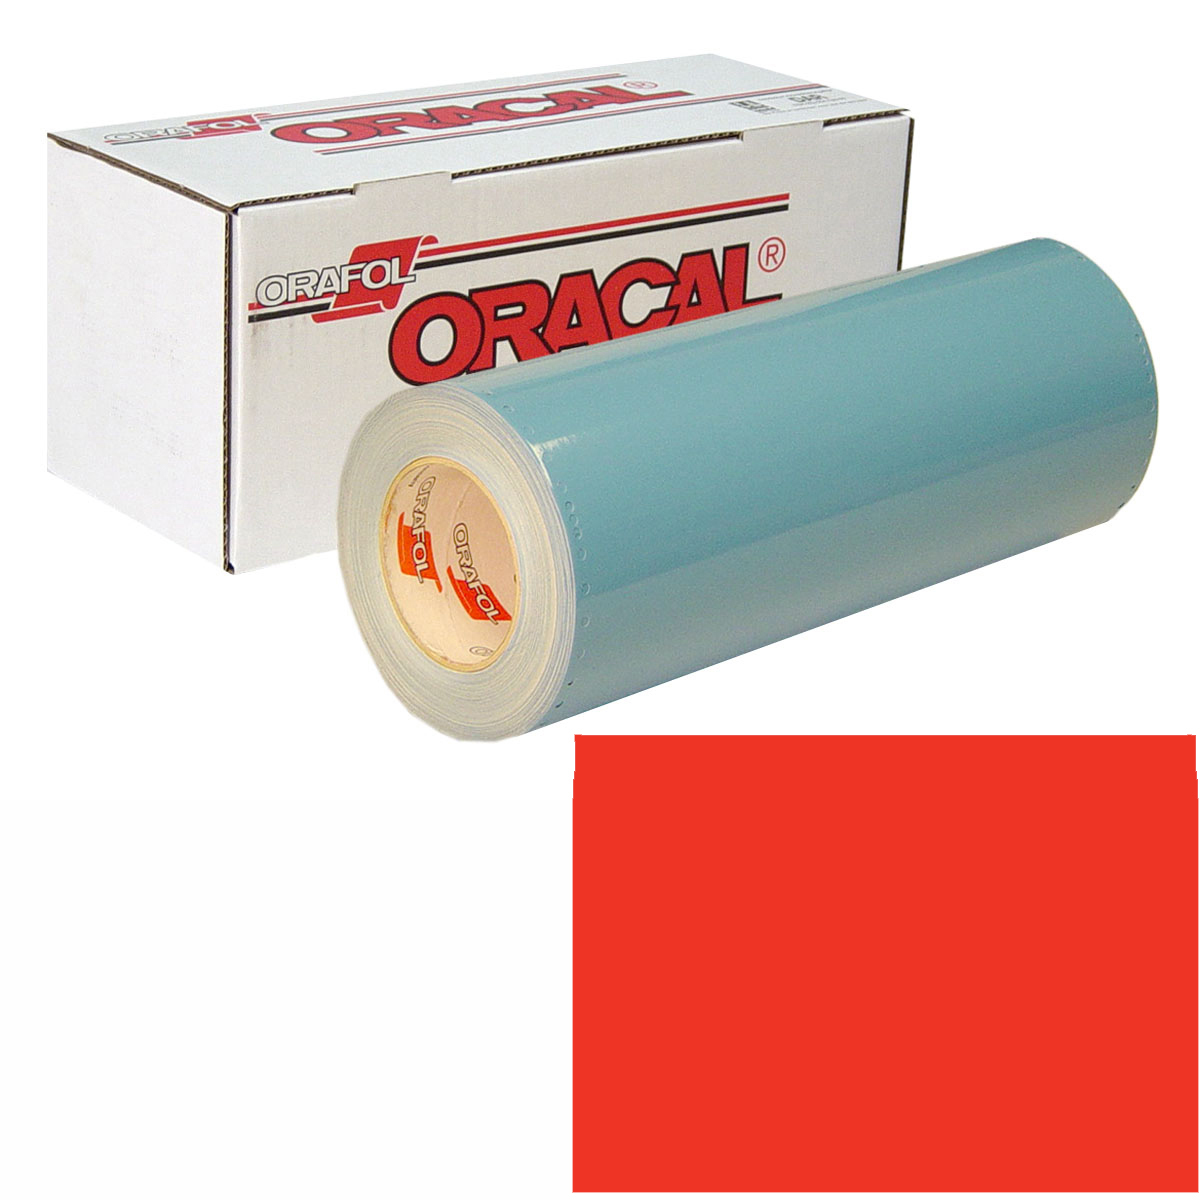 ORACAL 751 30in X 10yd 028 Cardinal Red